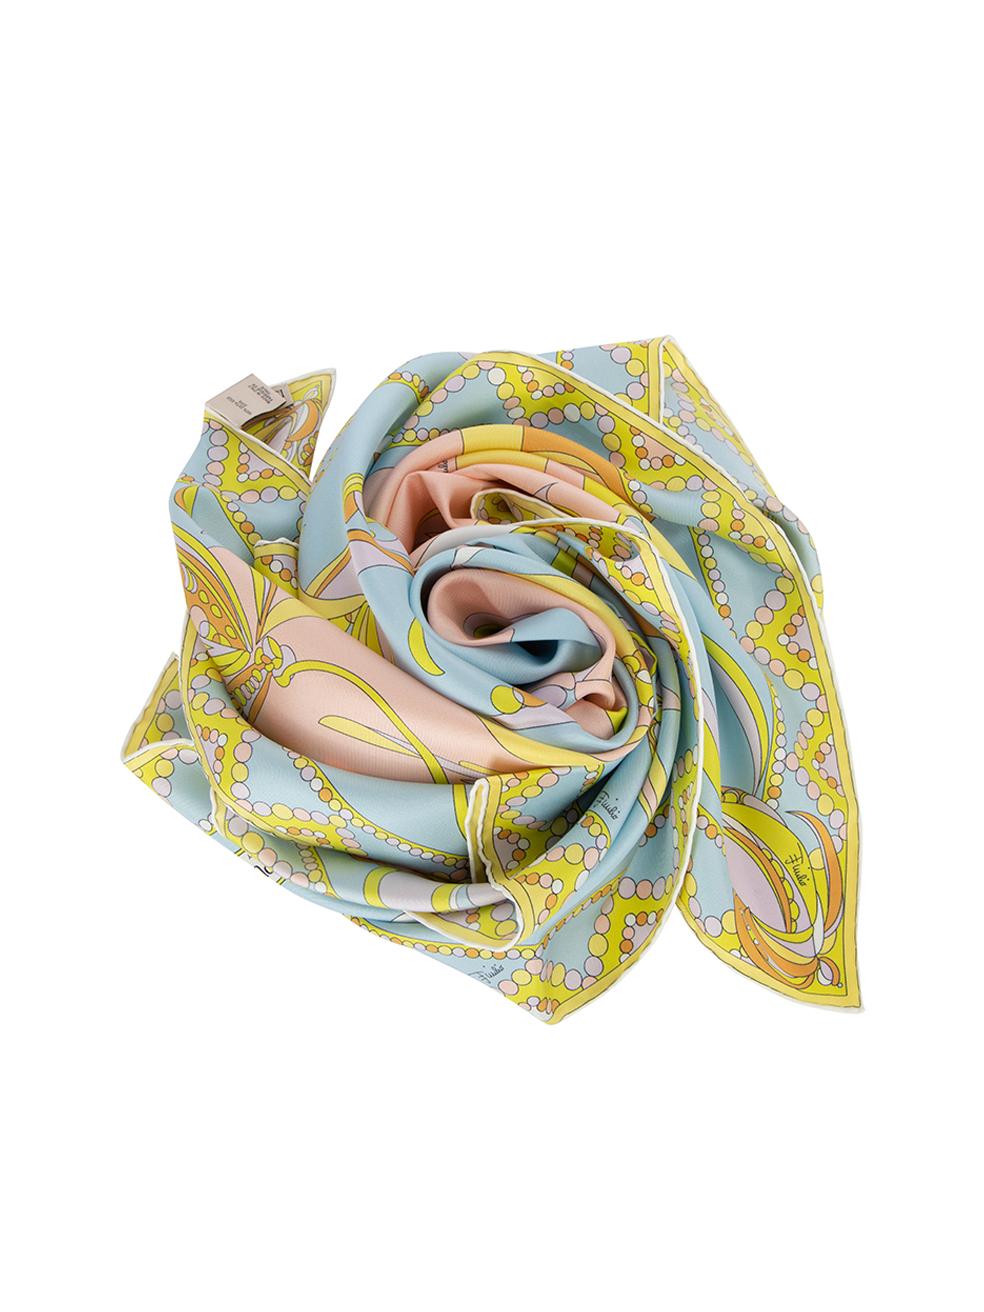 CONDITION is Never Worn. No visible wear to scarf is evident on this used Emilio Pucci designer resale item.   Details  Multicolour Silk Square scarf Abstract floral pattern   Made in Italy  Composition 100% Silk  Care instructions: Professional dry